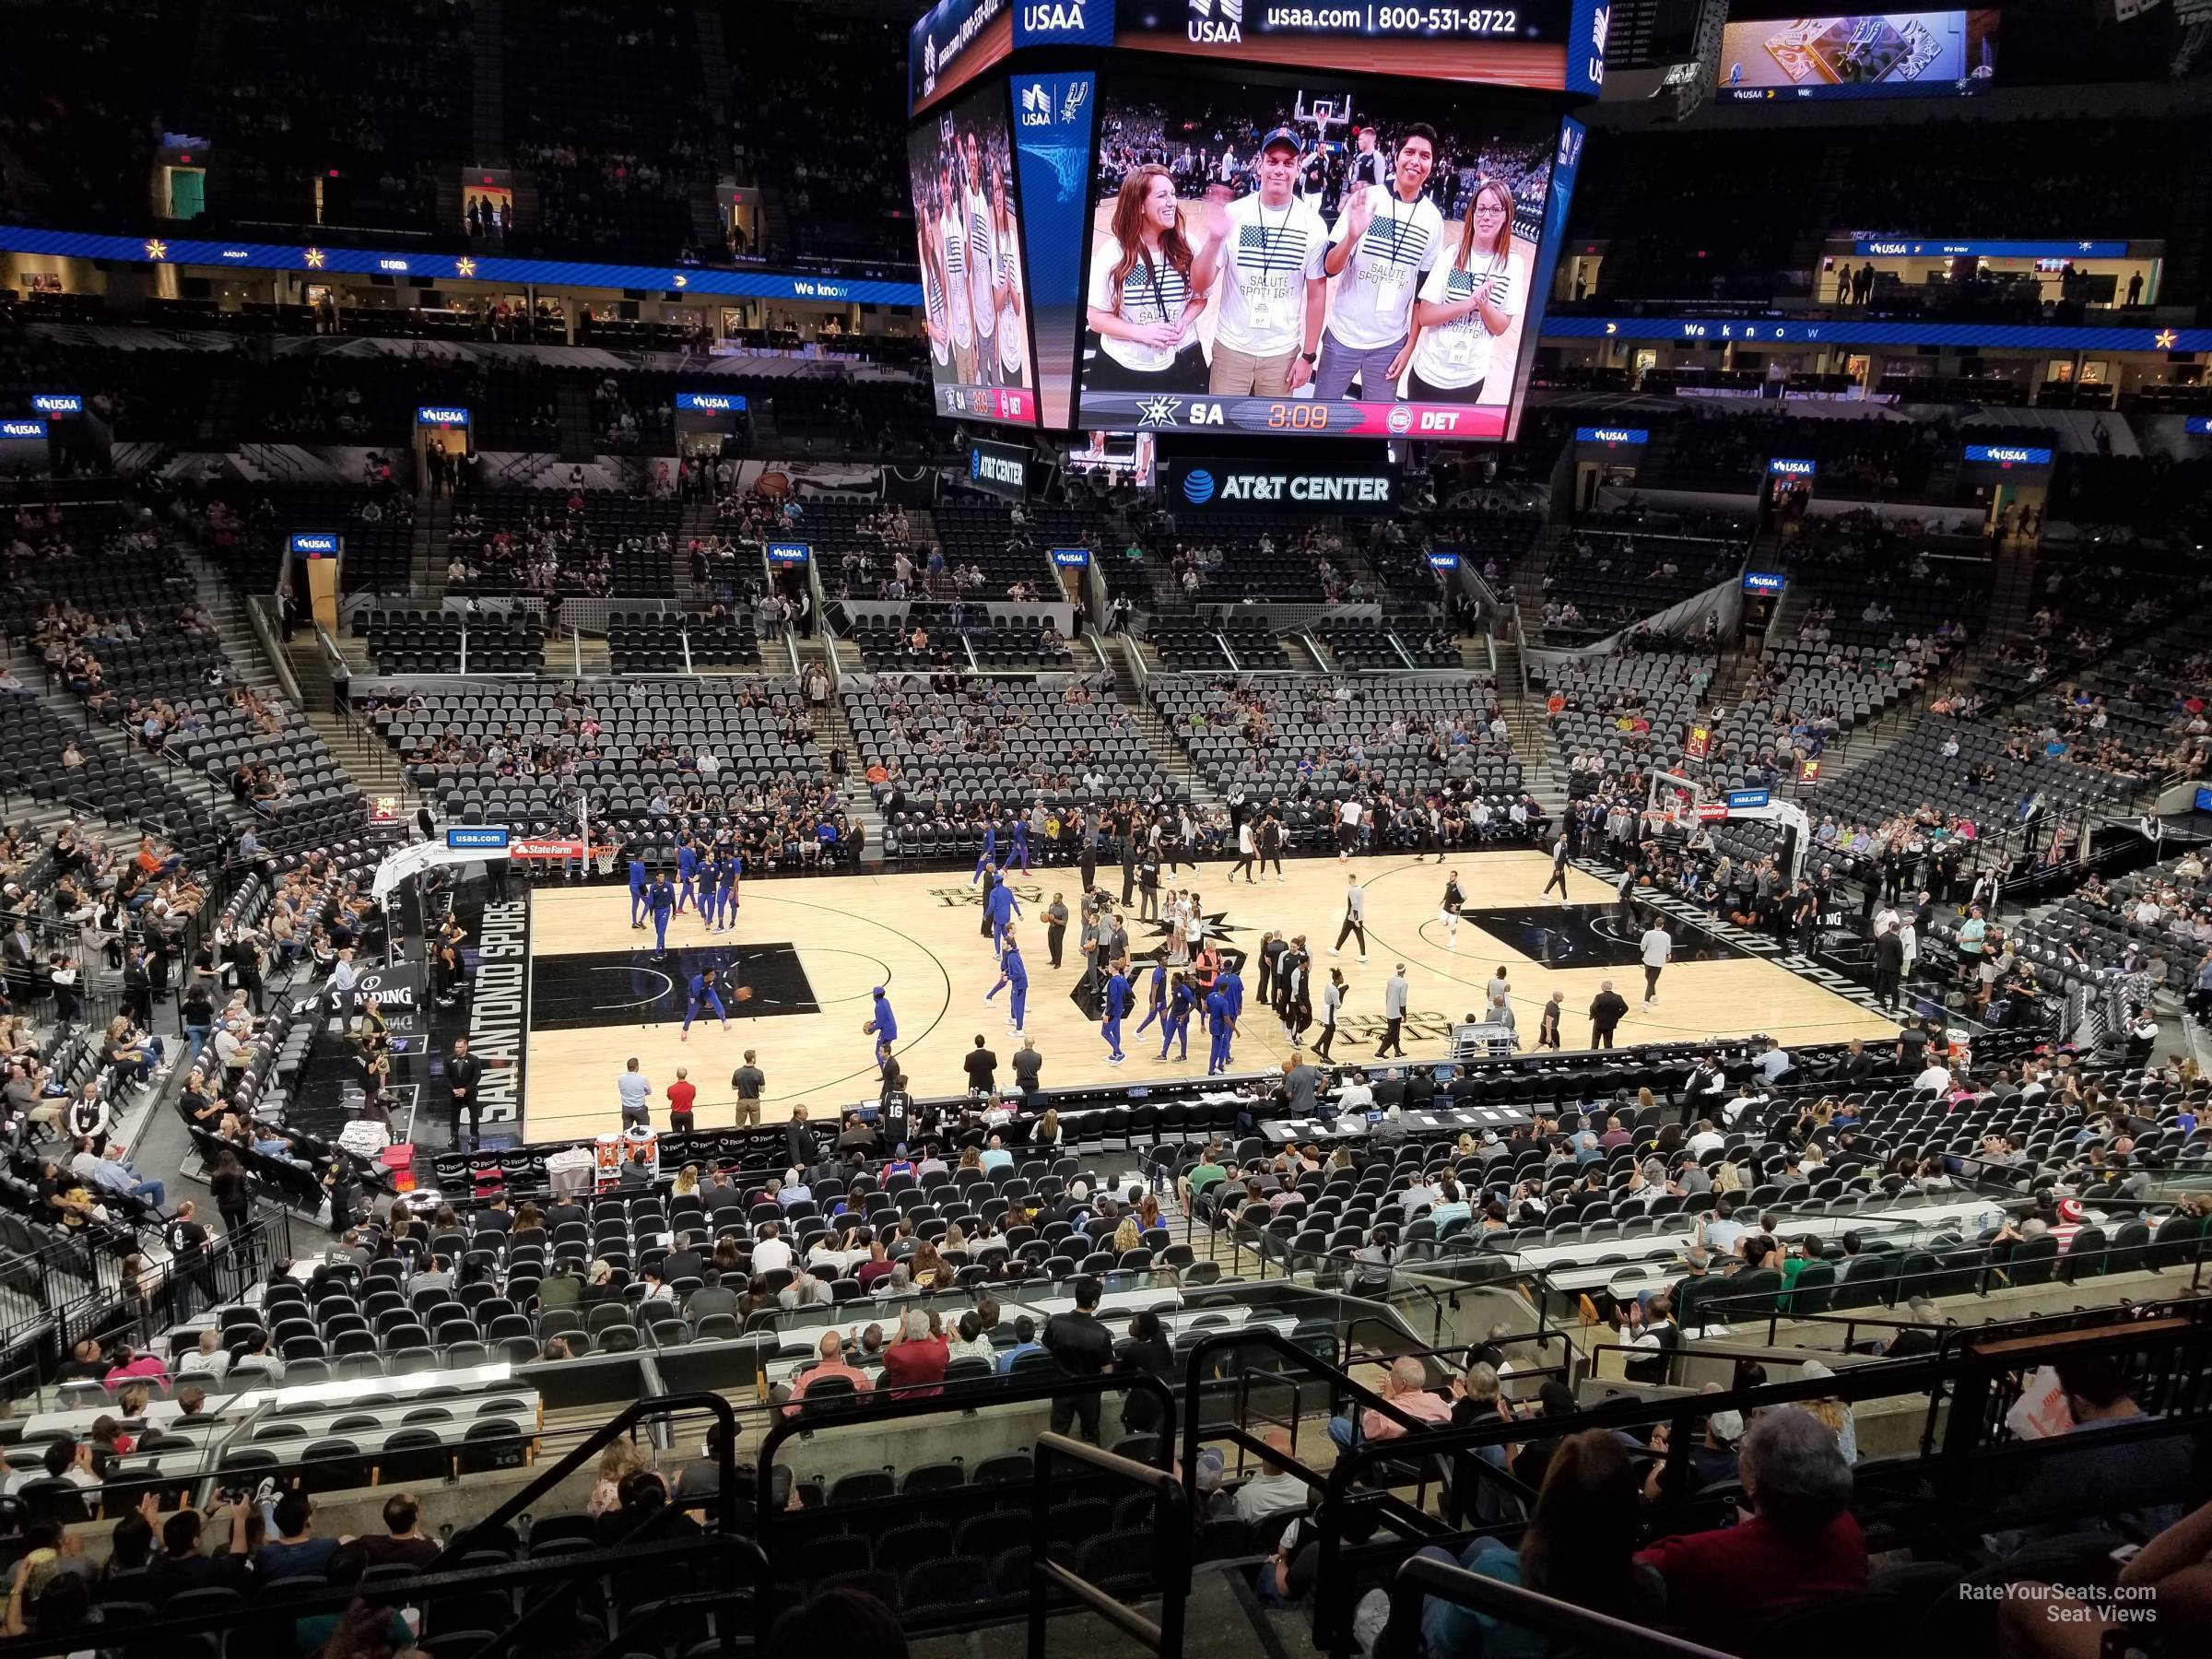 section 109, row 33 seat view  for basketball - at&t center